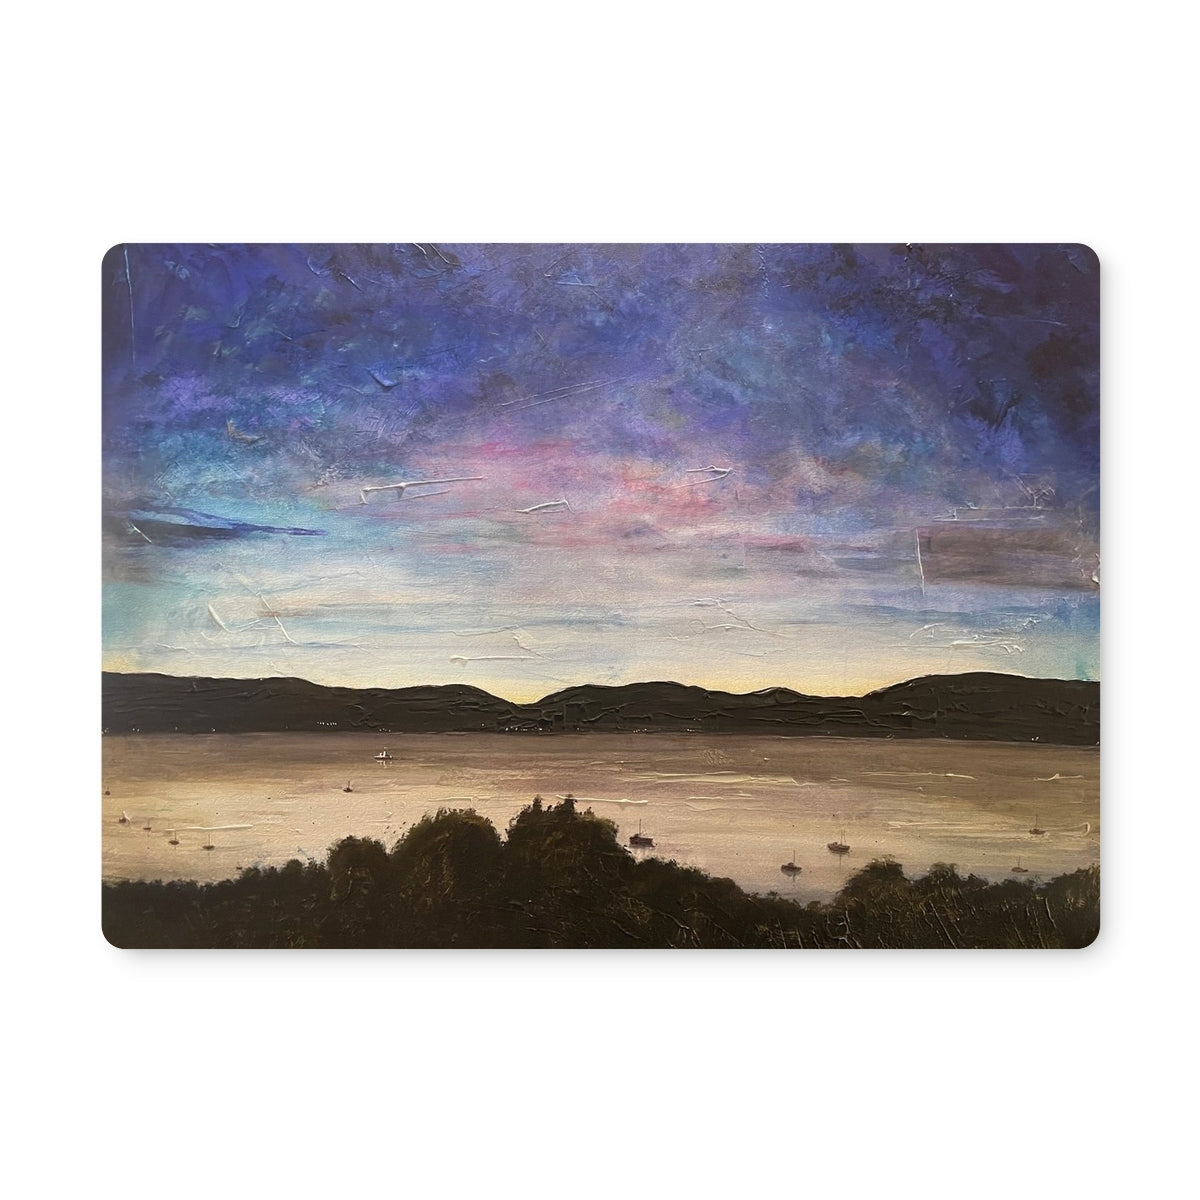 River Clyde Twilight Art Gifts Placemat-Placemats-River Clyde Art Gallery-2 Placemats-Paintings, Prints, Homeware, Art Gifts From Scotland By Scottish Artist Kevin Hunter